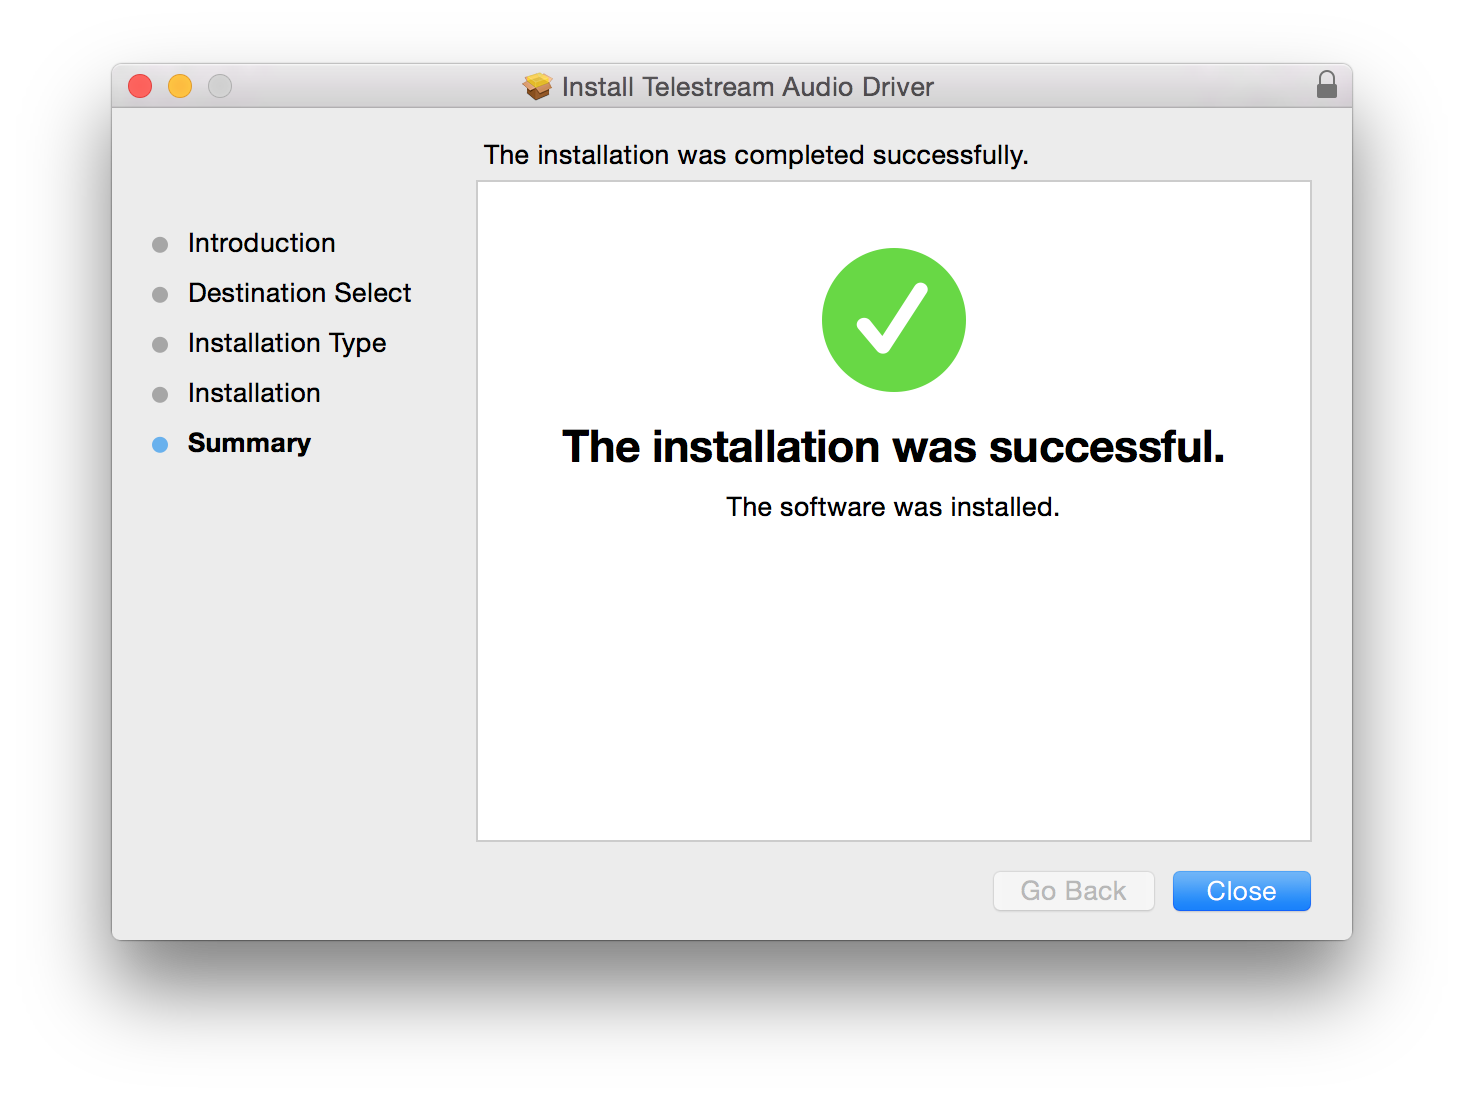 The installation was completed successfully / The installation was successful / The software was installed